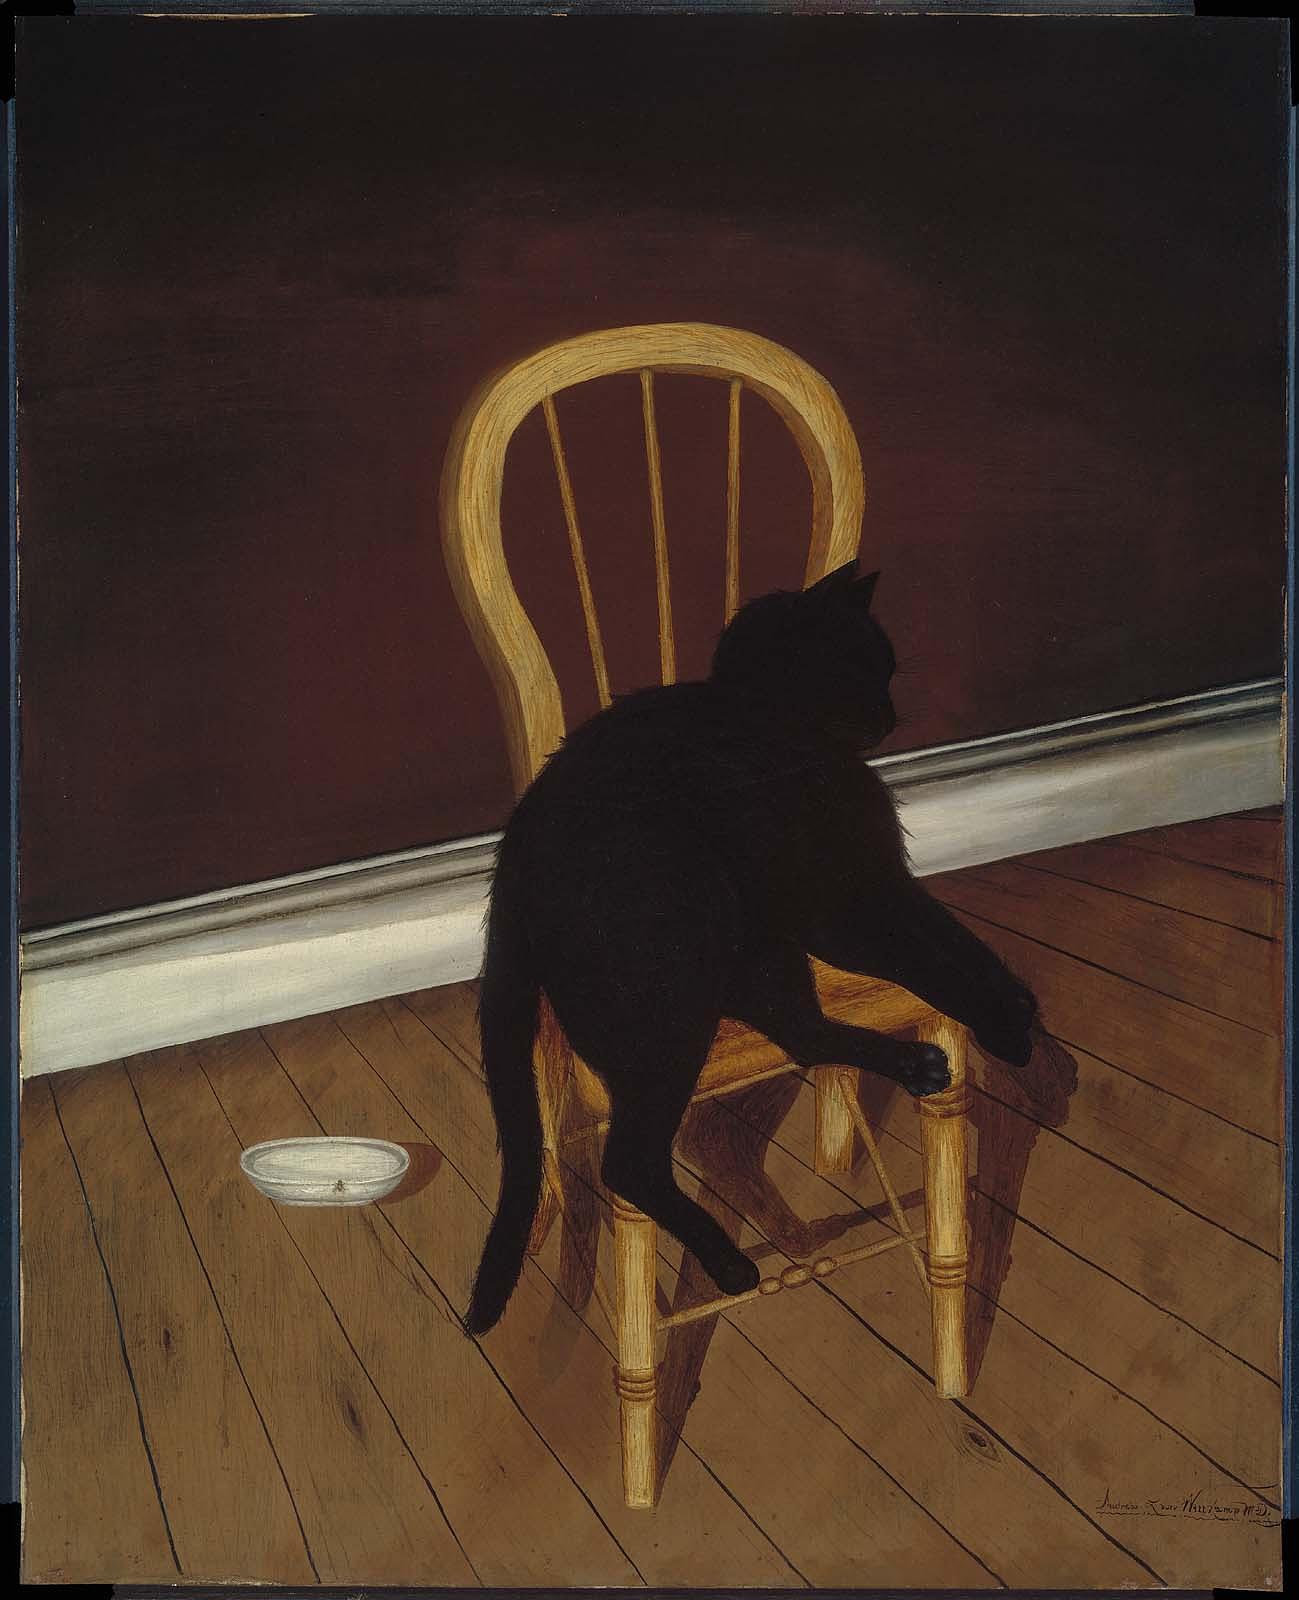 Black Cat on a Chair by Andrew L. von Wittkamp - after 1850 - 92.07 x 74.61 cm Museum of Fine Arts